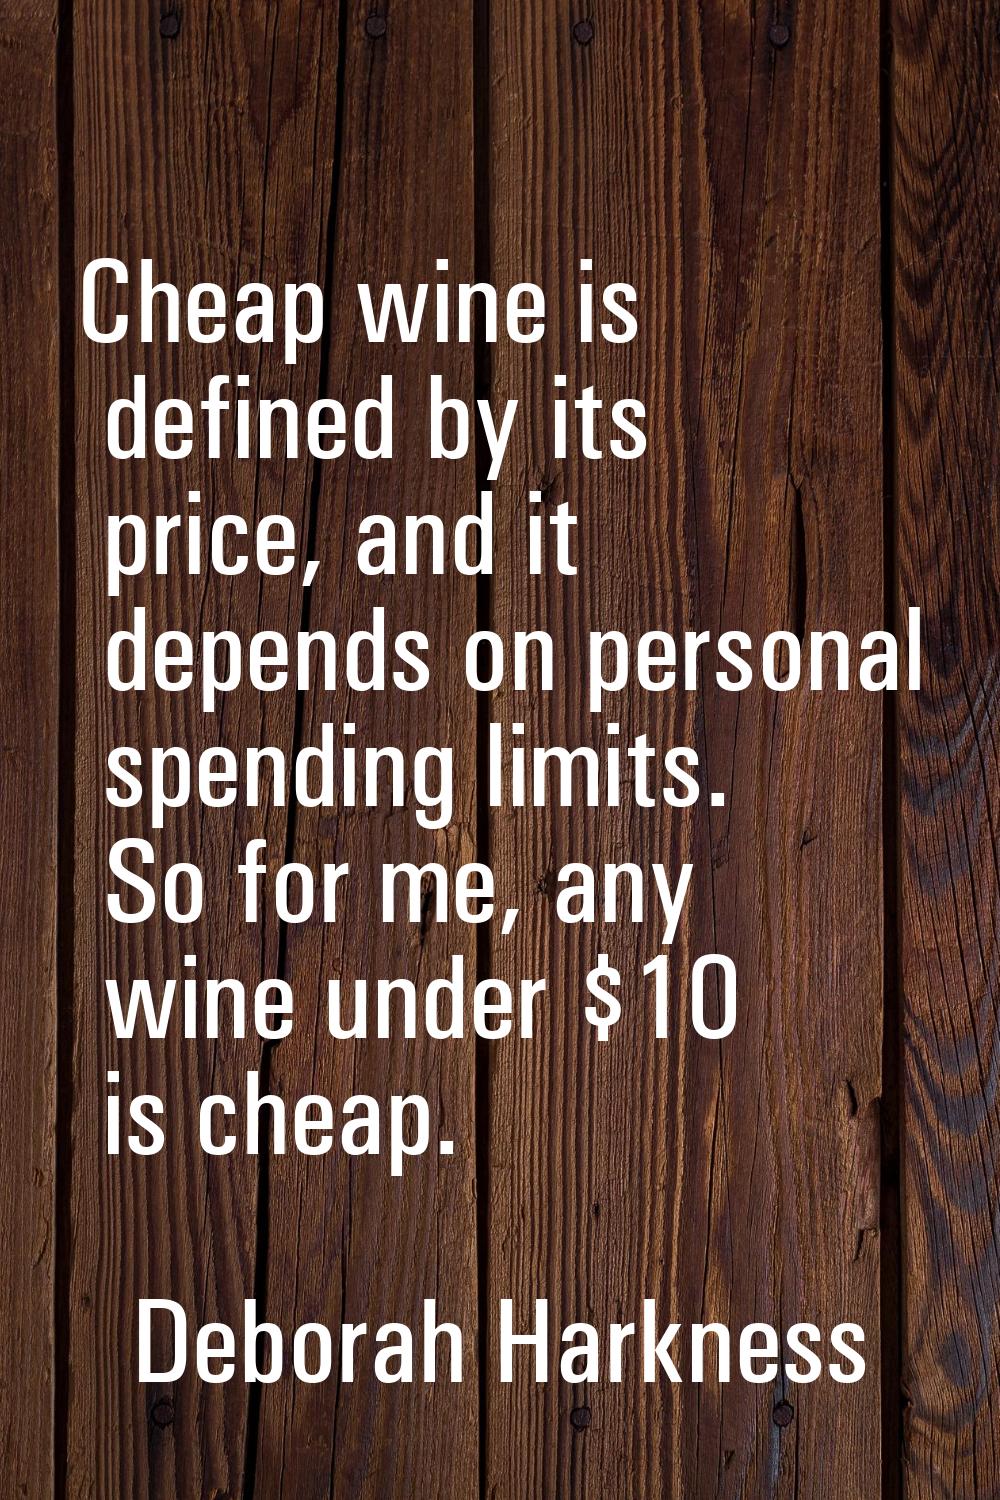 Cheap wine is defined by its price, and it depends on personal spending limits. So for me, any wine